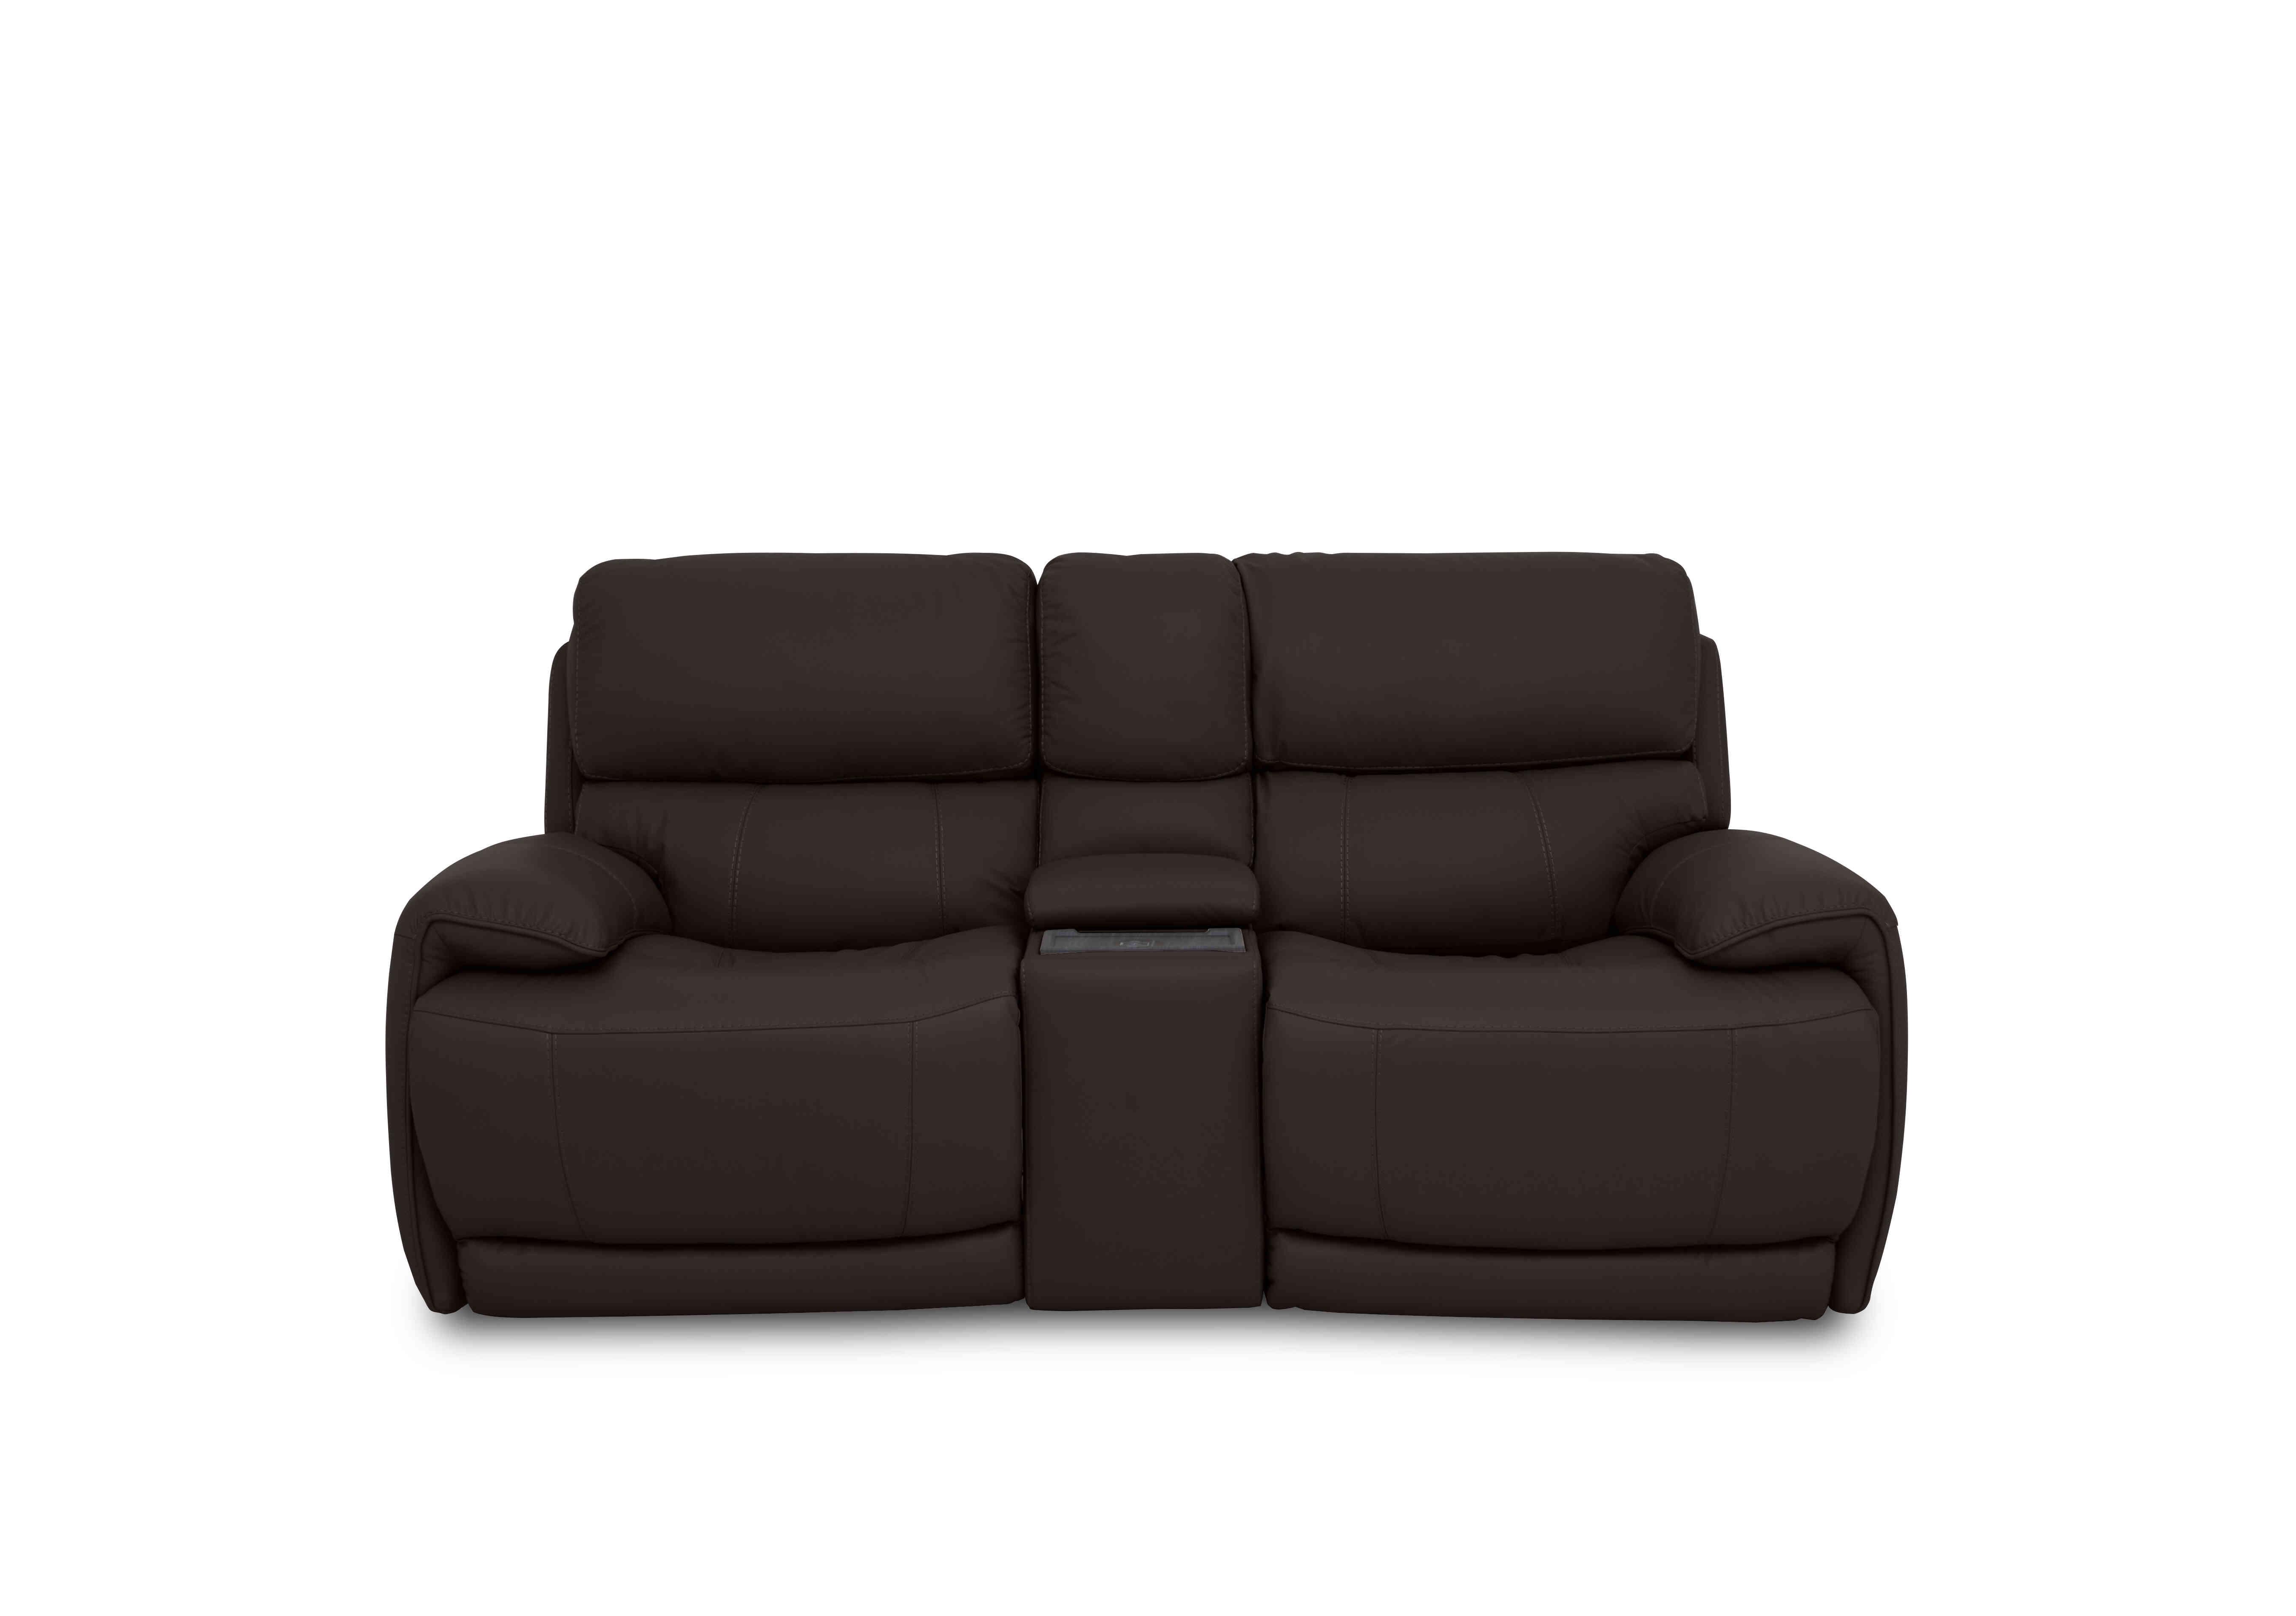 Rocco 2 Seater Leather Power Rocker Sofa with Cup Holders and Power Headrests in Bv-1748 Dark Chocolate on Furniture Village